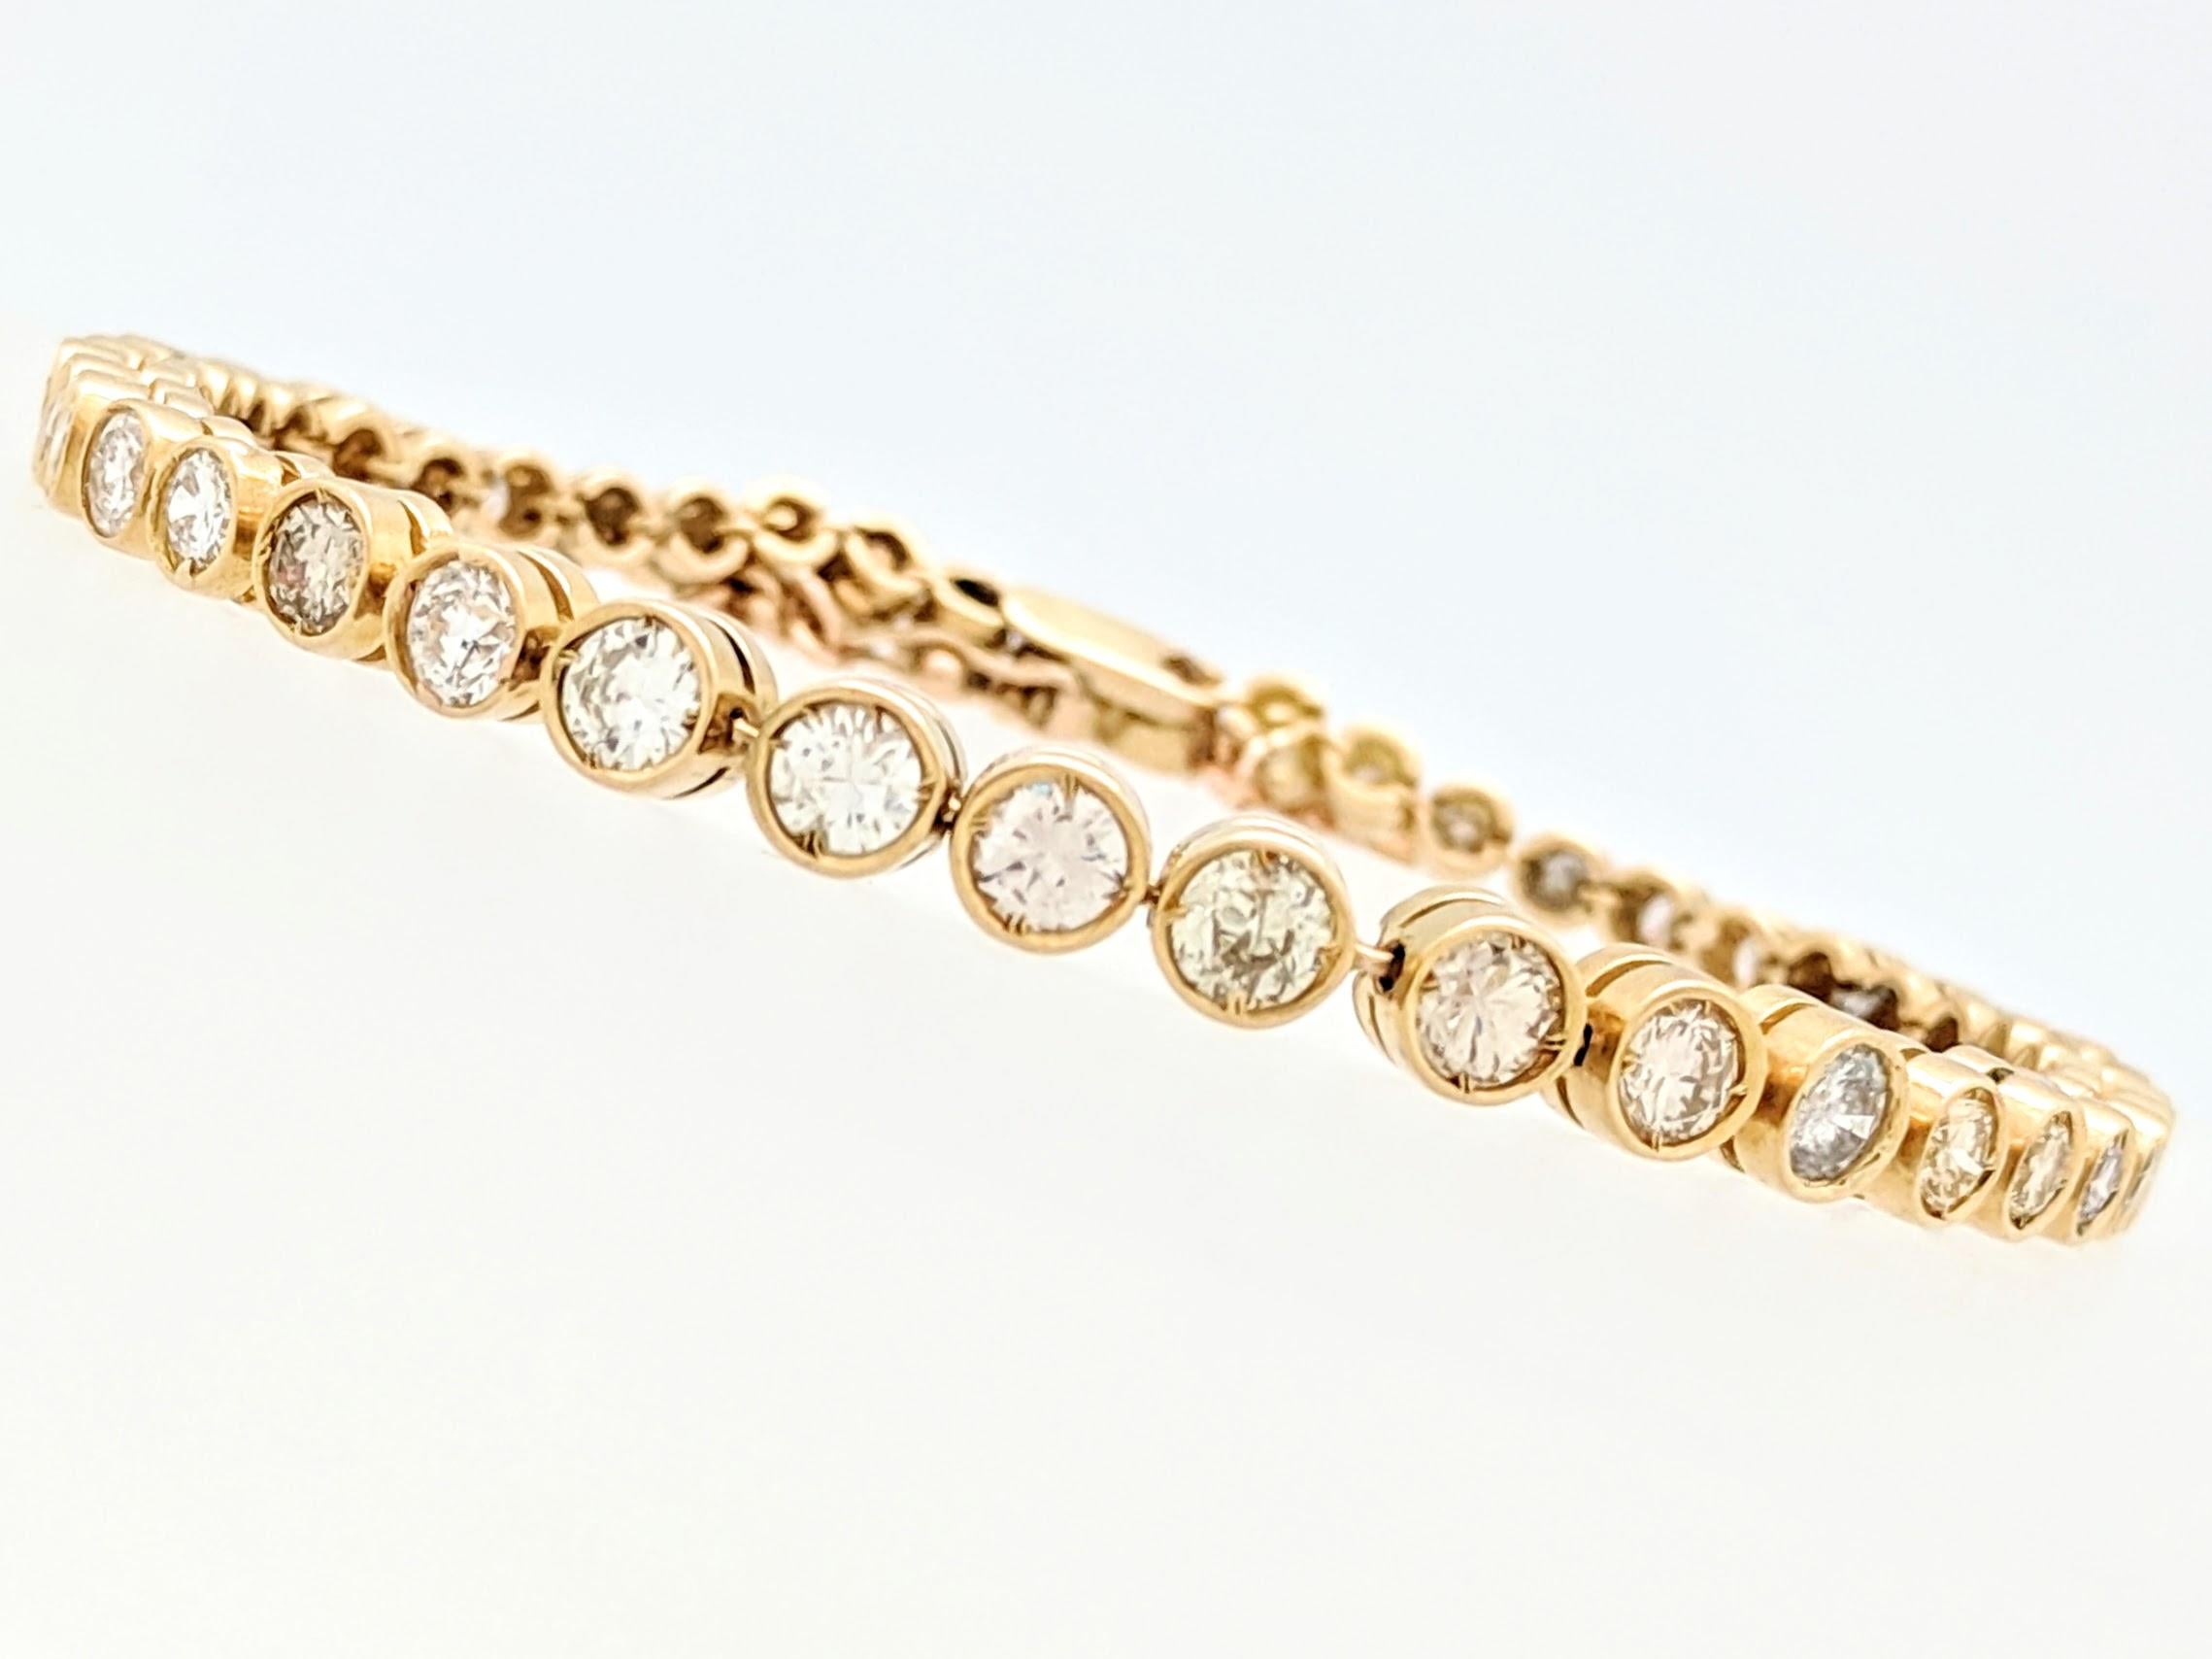 14k Yellow Gold 3.44tcw Bezel Set Diamond Tennis Bracelet

You are viewing a Beautiful Bezel Set Diamond Tennis Bracelet that is sure to make a statement!

The bracelet is crafted from 14k yellow gold, measures 5mm in width (at its widest point) and